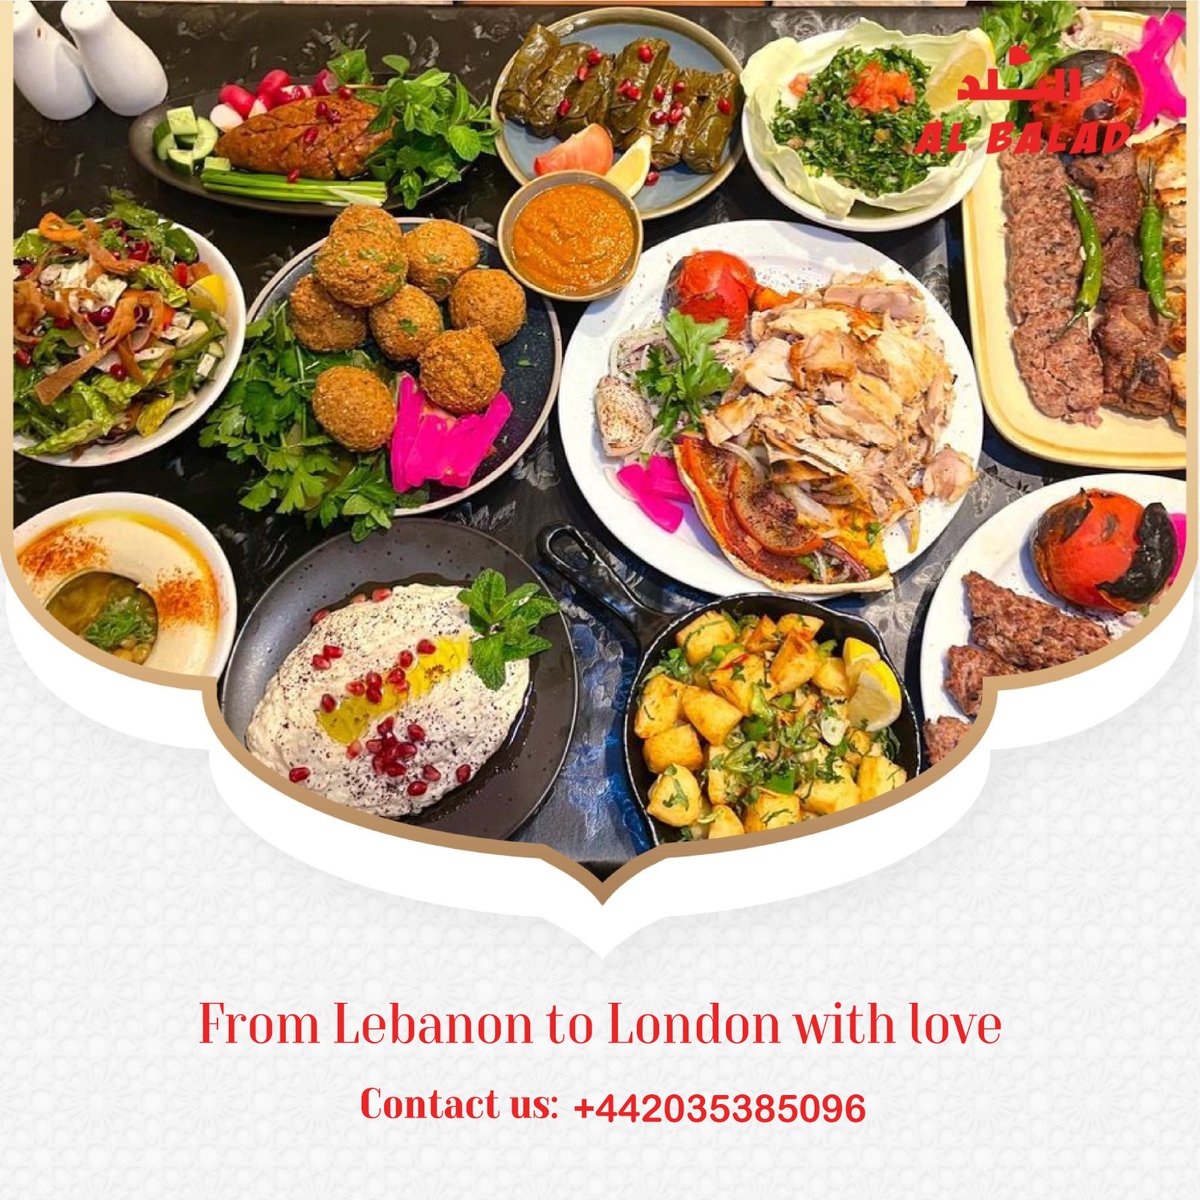 Gather your friends and experience the rich flavours and fantastic dishes of Lebanon at our “ Al Balad” restaurant.👨‍👩‍👧‍👧❤️ enjoy vibes and make unforgettable memories with your favourites.😍 'From Lebanon to London with love'❤️ #lebaneserestaurant #lebanesecusiene #Topfood #foodie